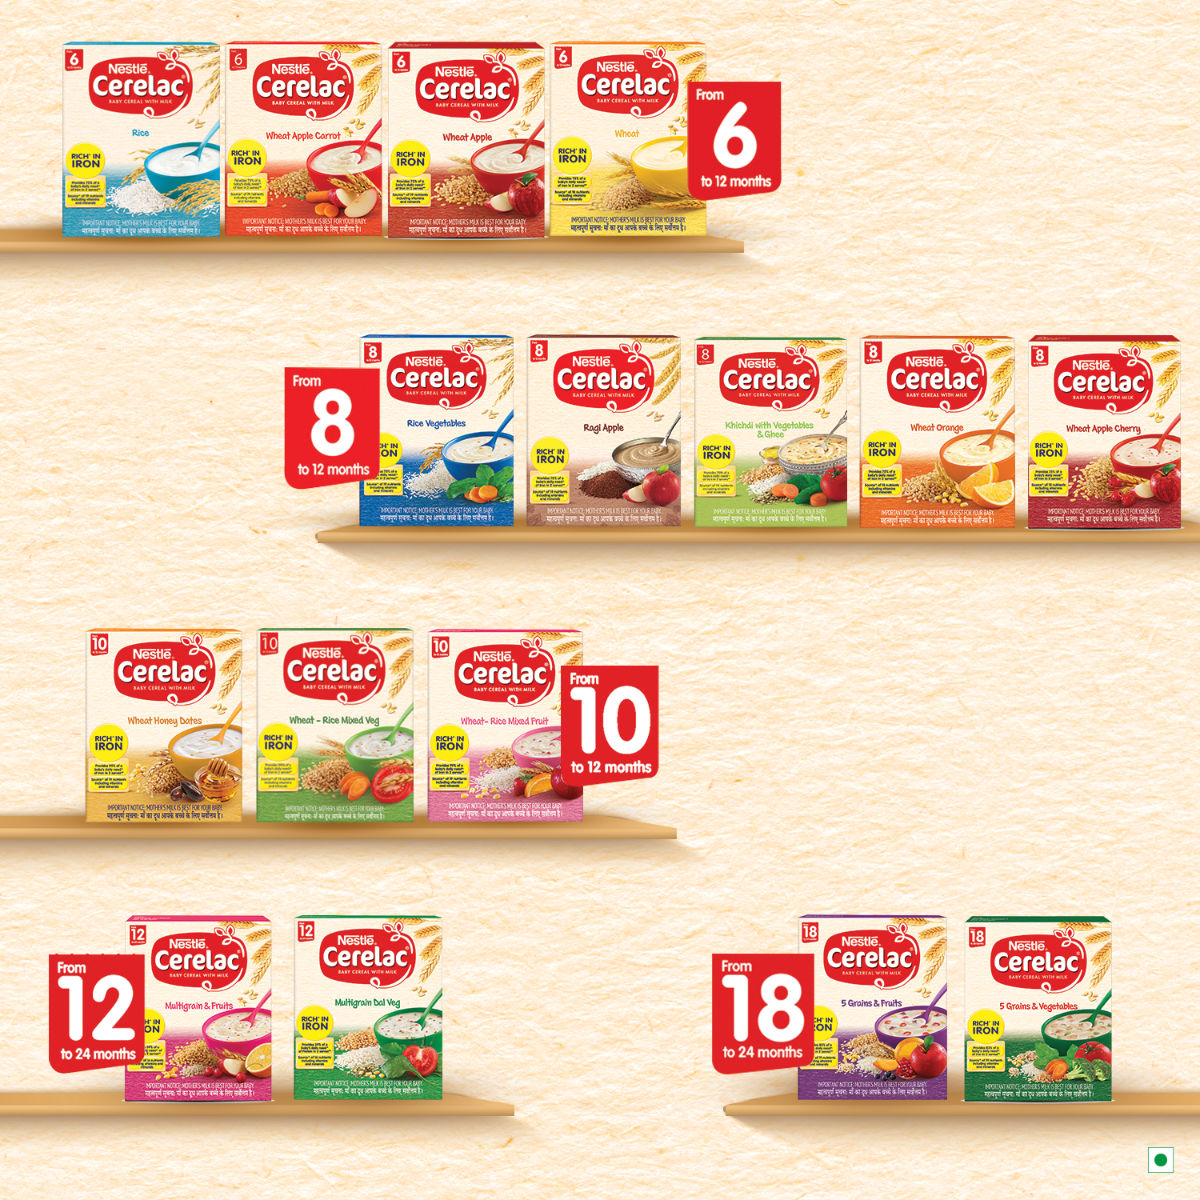 Nestle Cerelac Wheat Rice Mixed Veg Baby Cereal, 10 to 12 Months, Stage 3, 300 gm Refill Pack, Pack of 1 